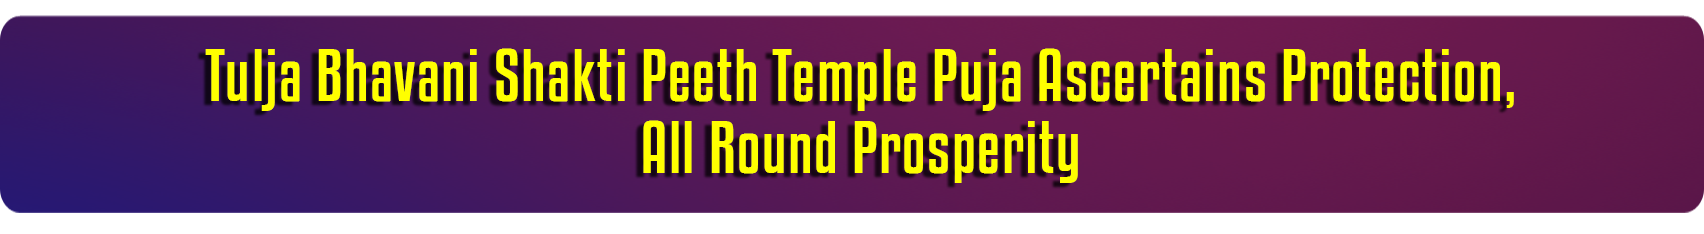 Temple Pujas